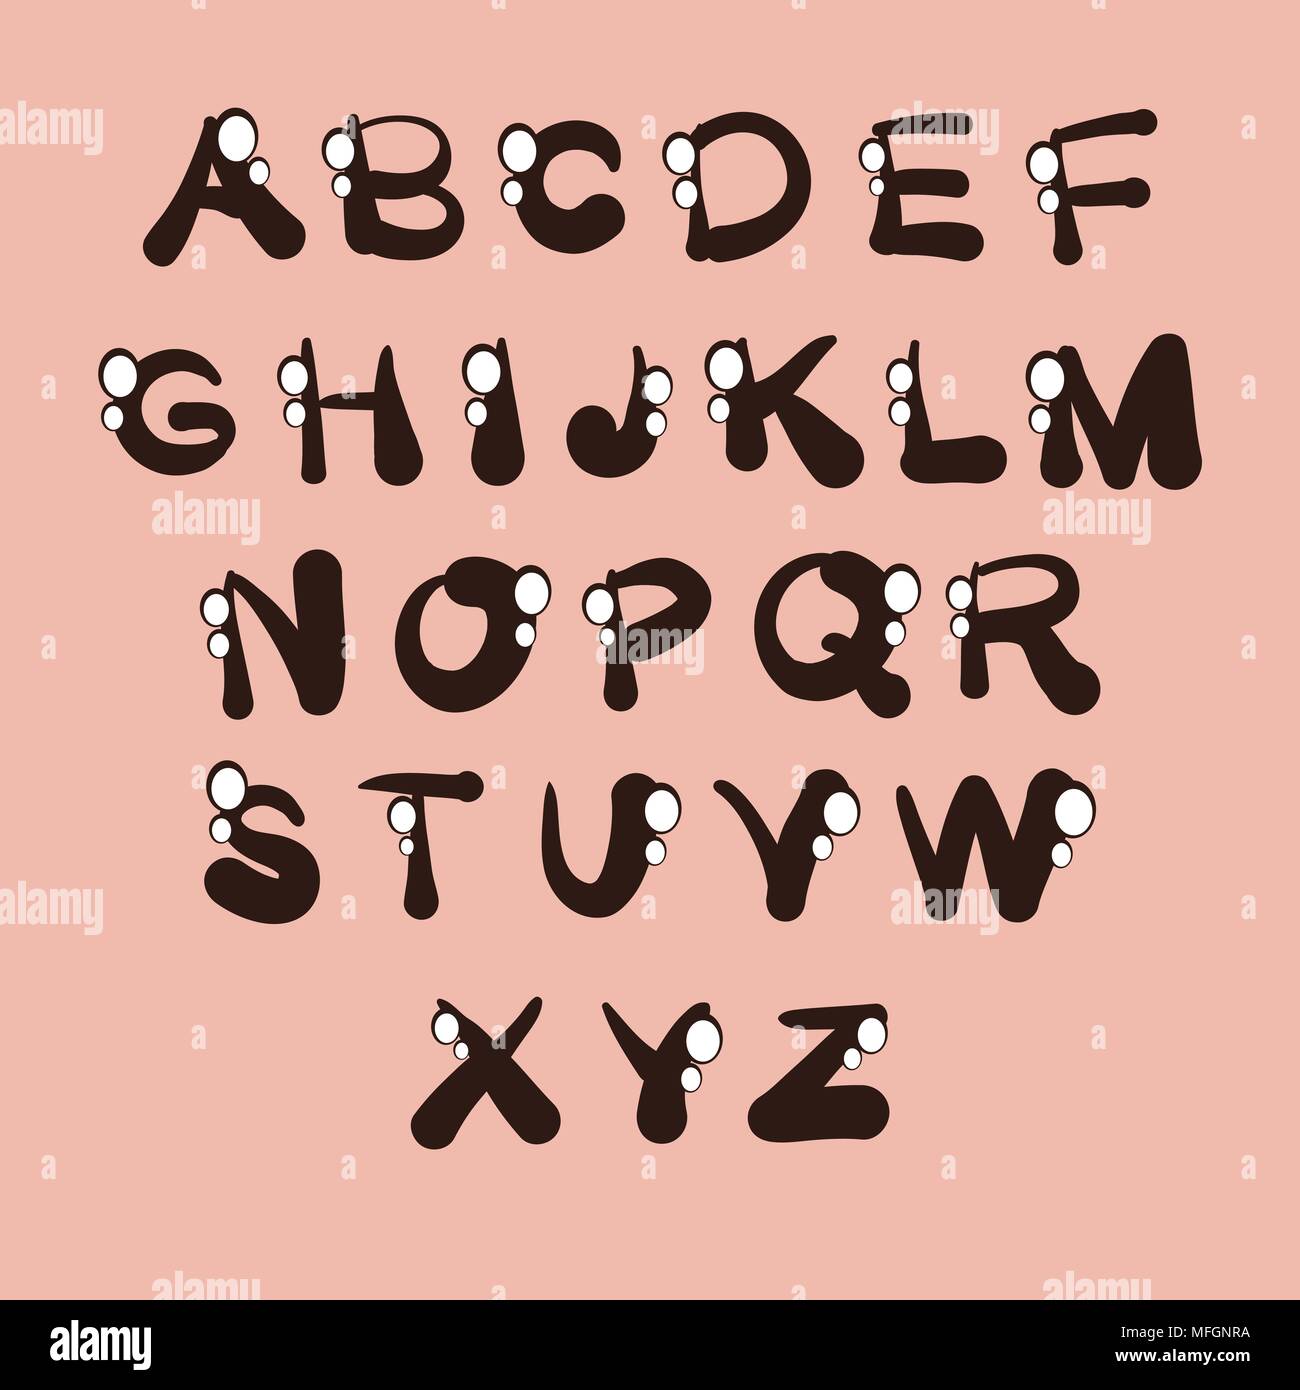 Hand Drawn Cartoon Font With Decorative Elements On A Pink Background